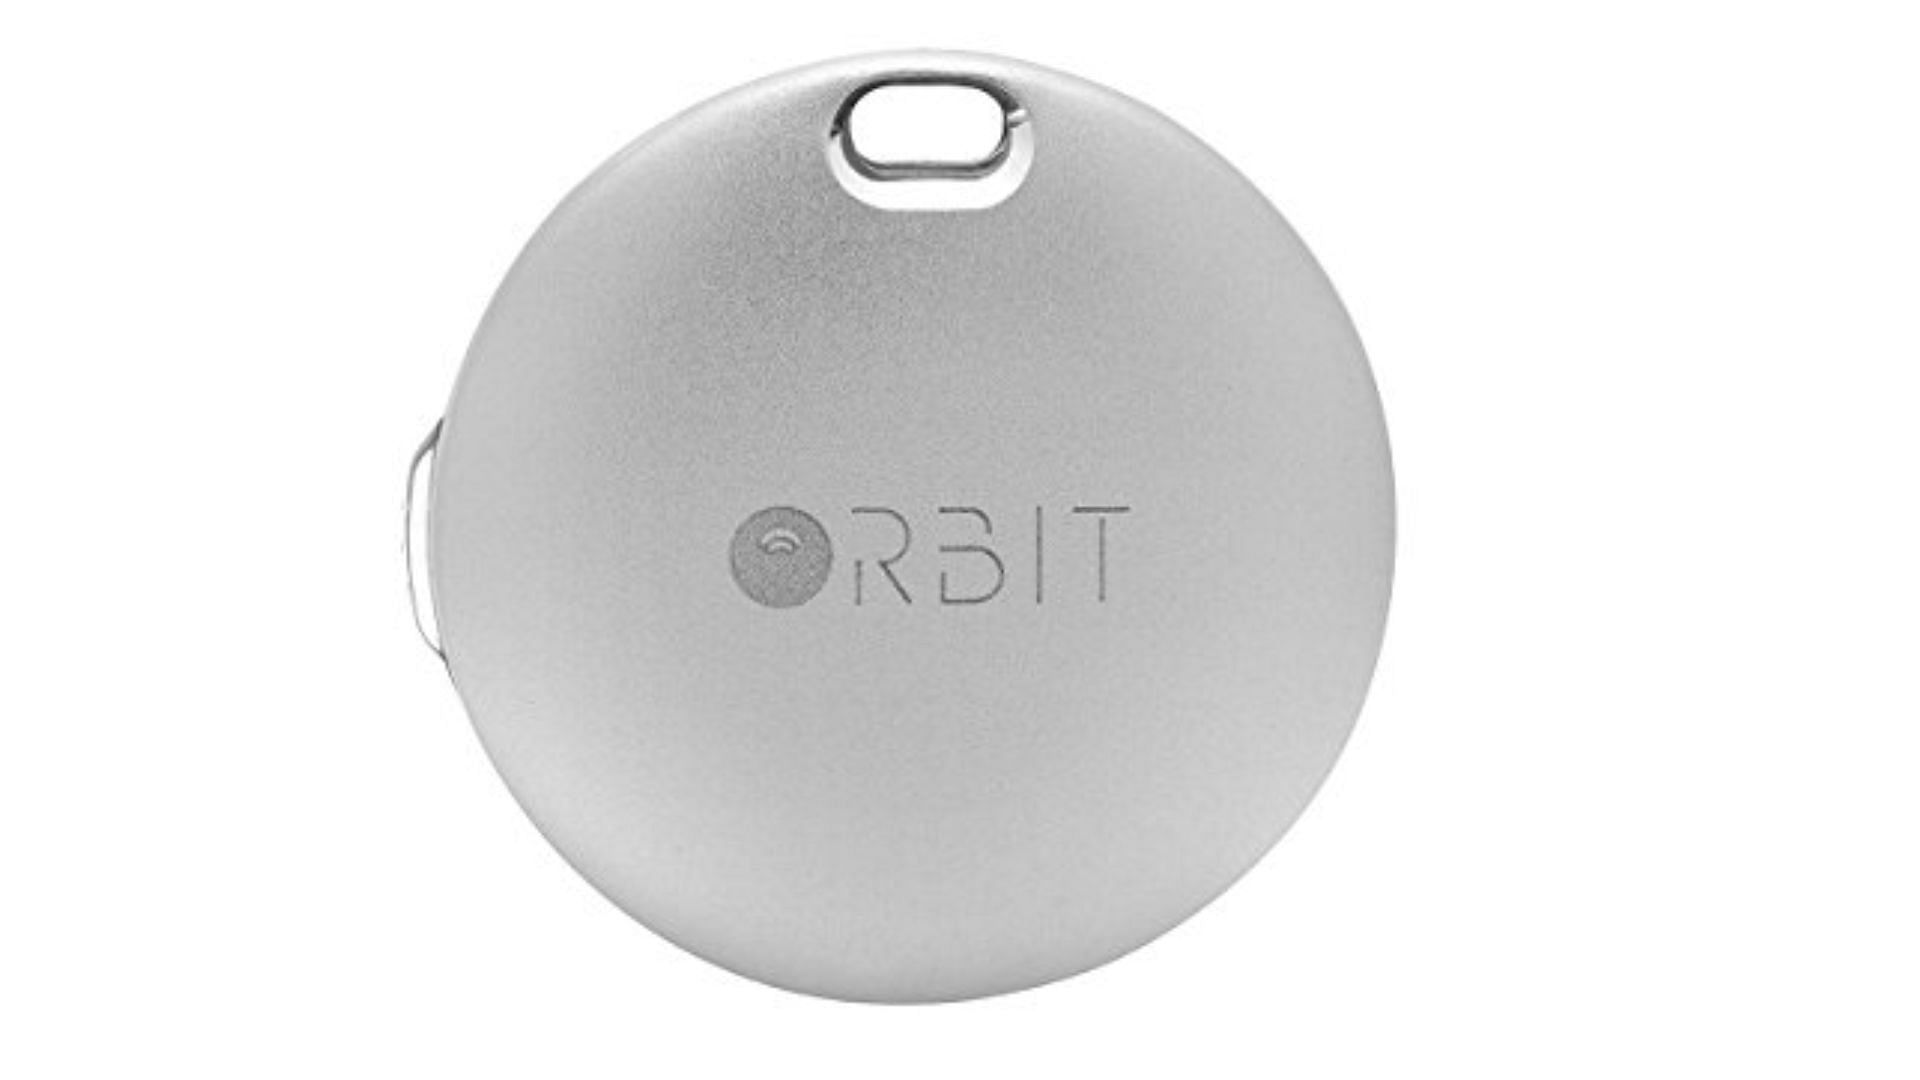 Tracker with an in-built camera (Image via Orbit/Amazon)